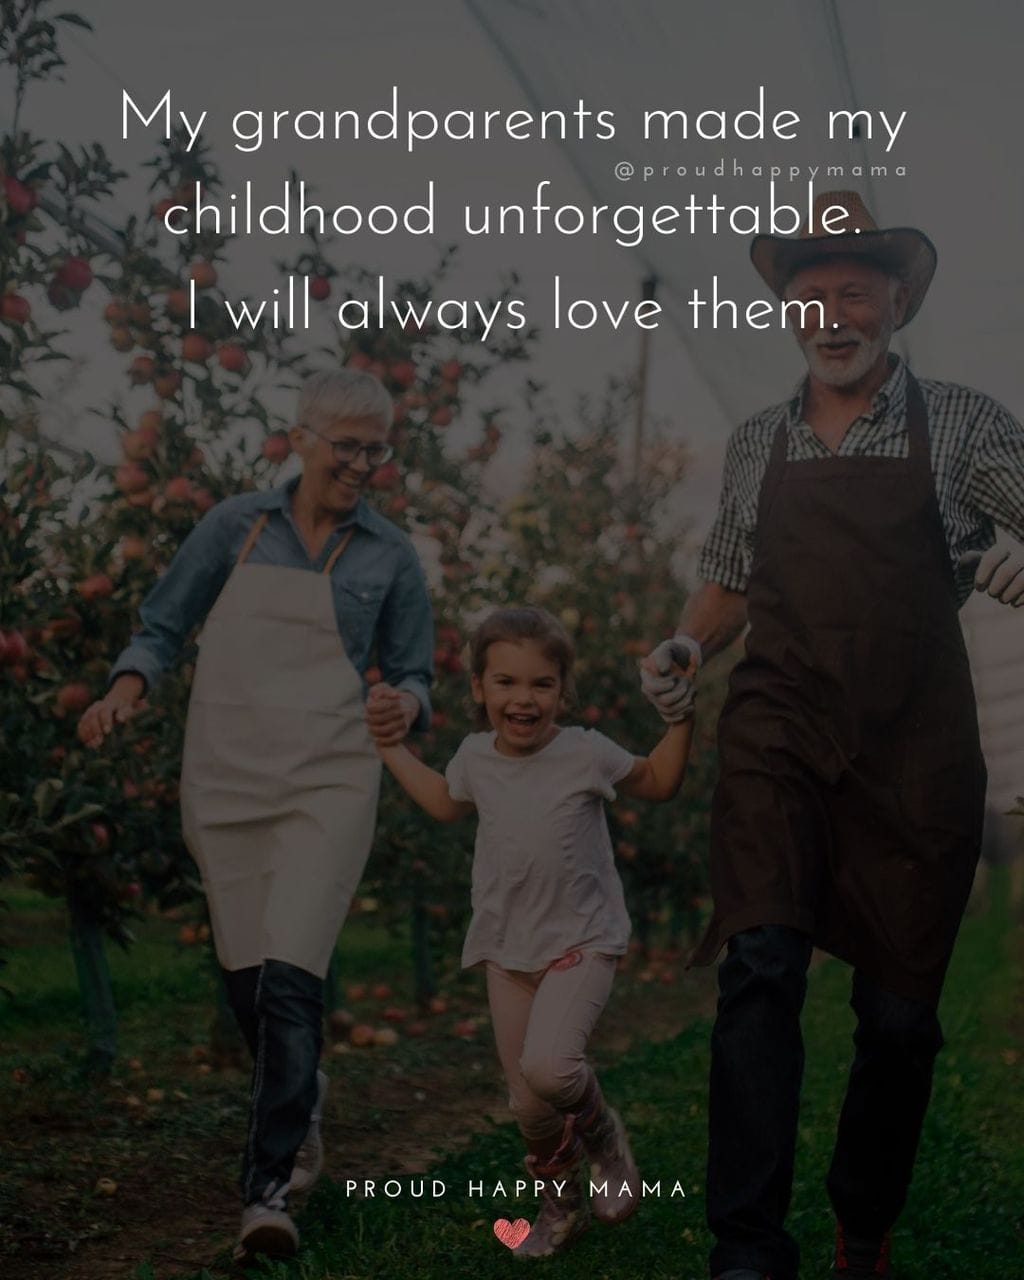 Being A Grandparent Quotes | My grandparents made my childhood unforgettable. I will always love them.